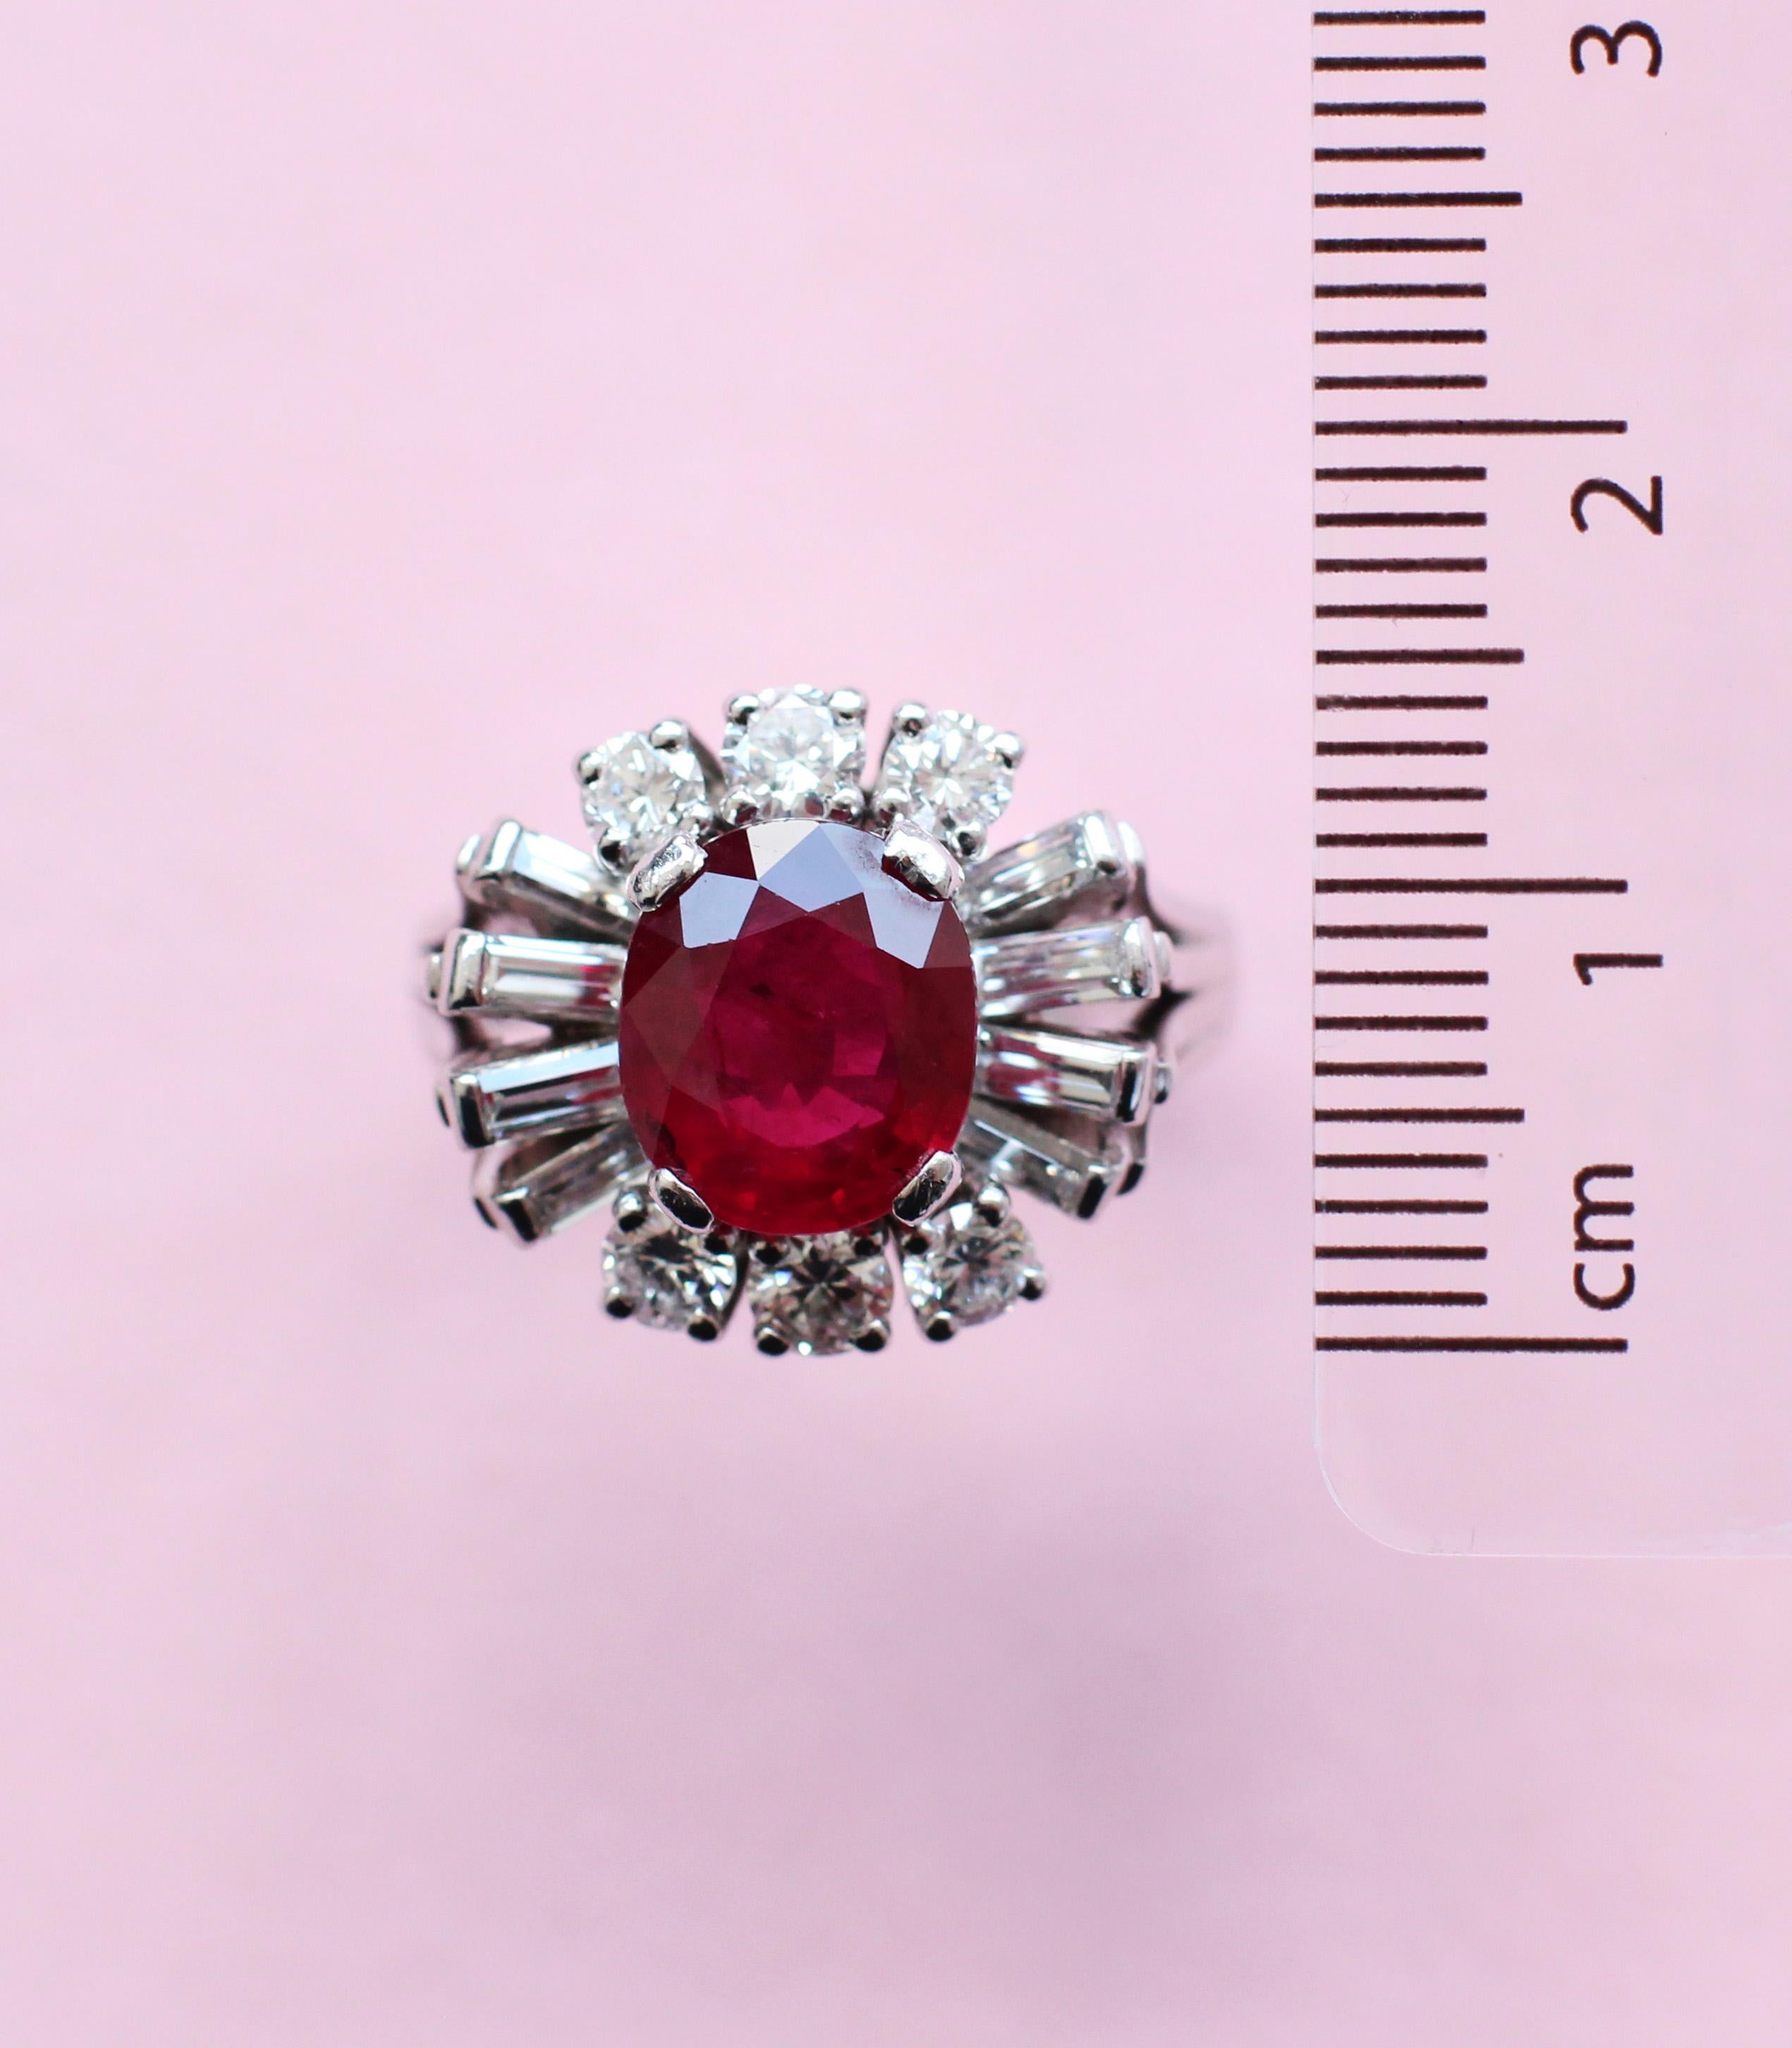 This one-of-a-kind white gold ring brings together an inviting cabochon ruby and round brilliant white diamonds in a design that’s both intricate and graceful. The centre stone, specially selected from the Haruni vault, is a bright red oval ruby,